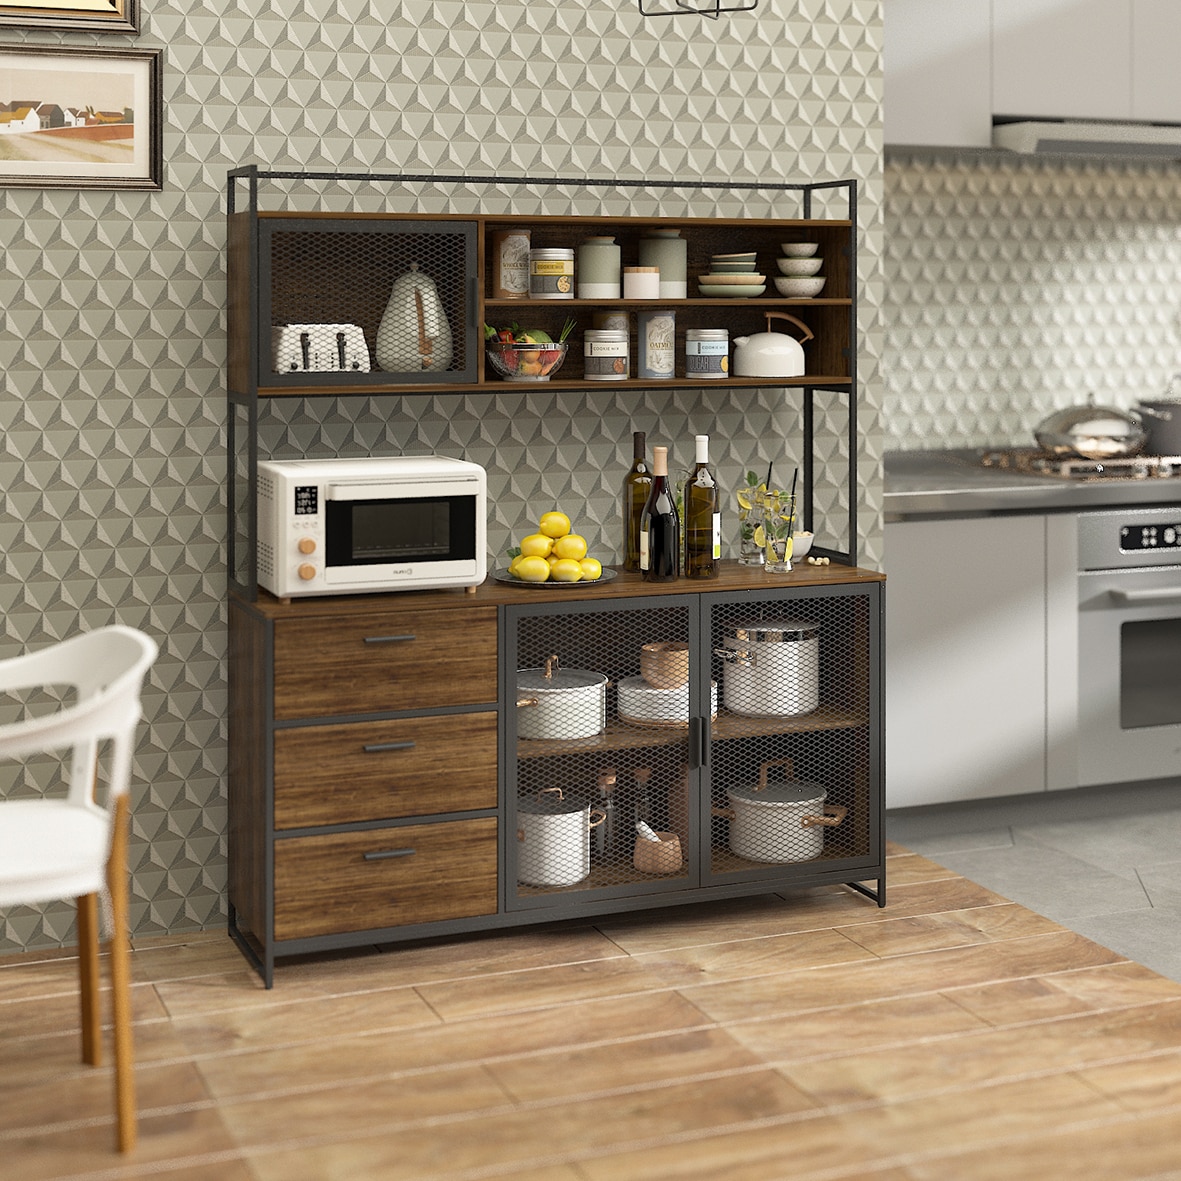 Fufu A Contemporary Modern Brown Pantry With Microwave Stand 3 Drawers 4 Shelves And Doors Ljy Kf210150 01 02